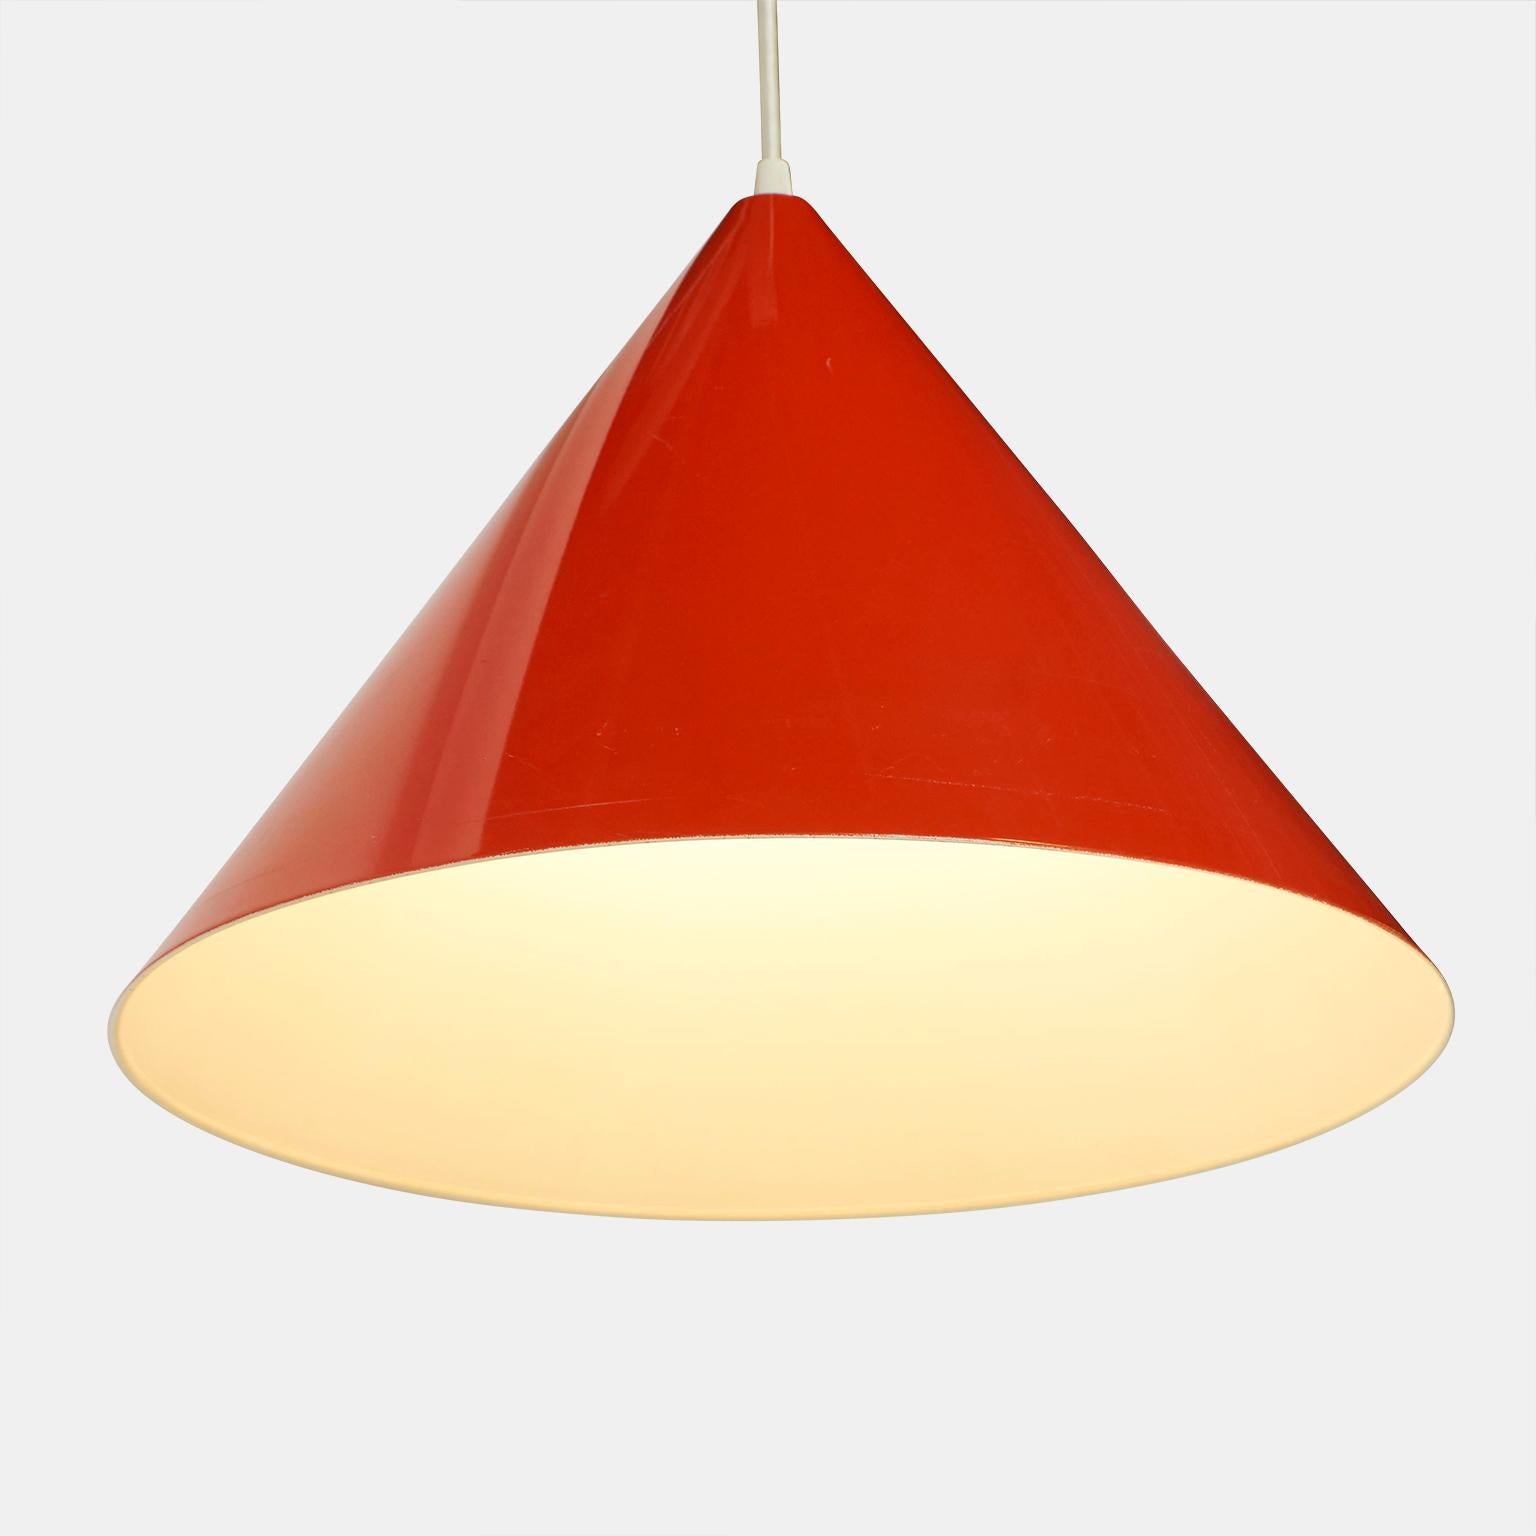 A single billiards lamp with an enameled orange conical metal shade by Louis Poulsen. Rewired with white cloth cord.